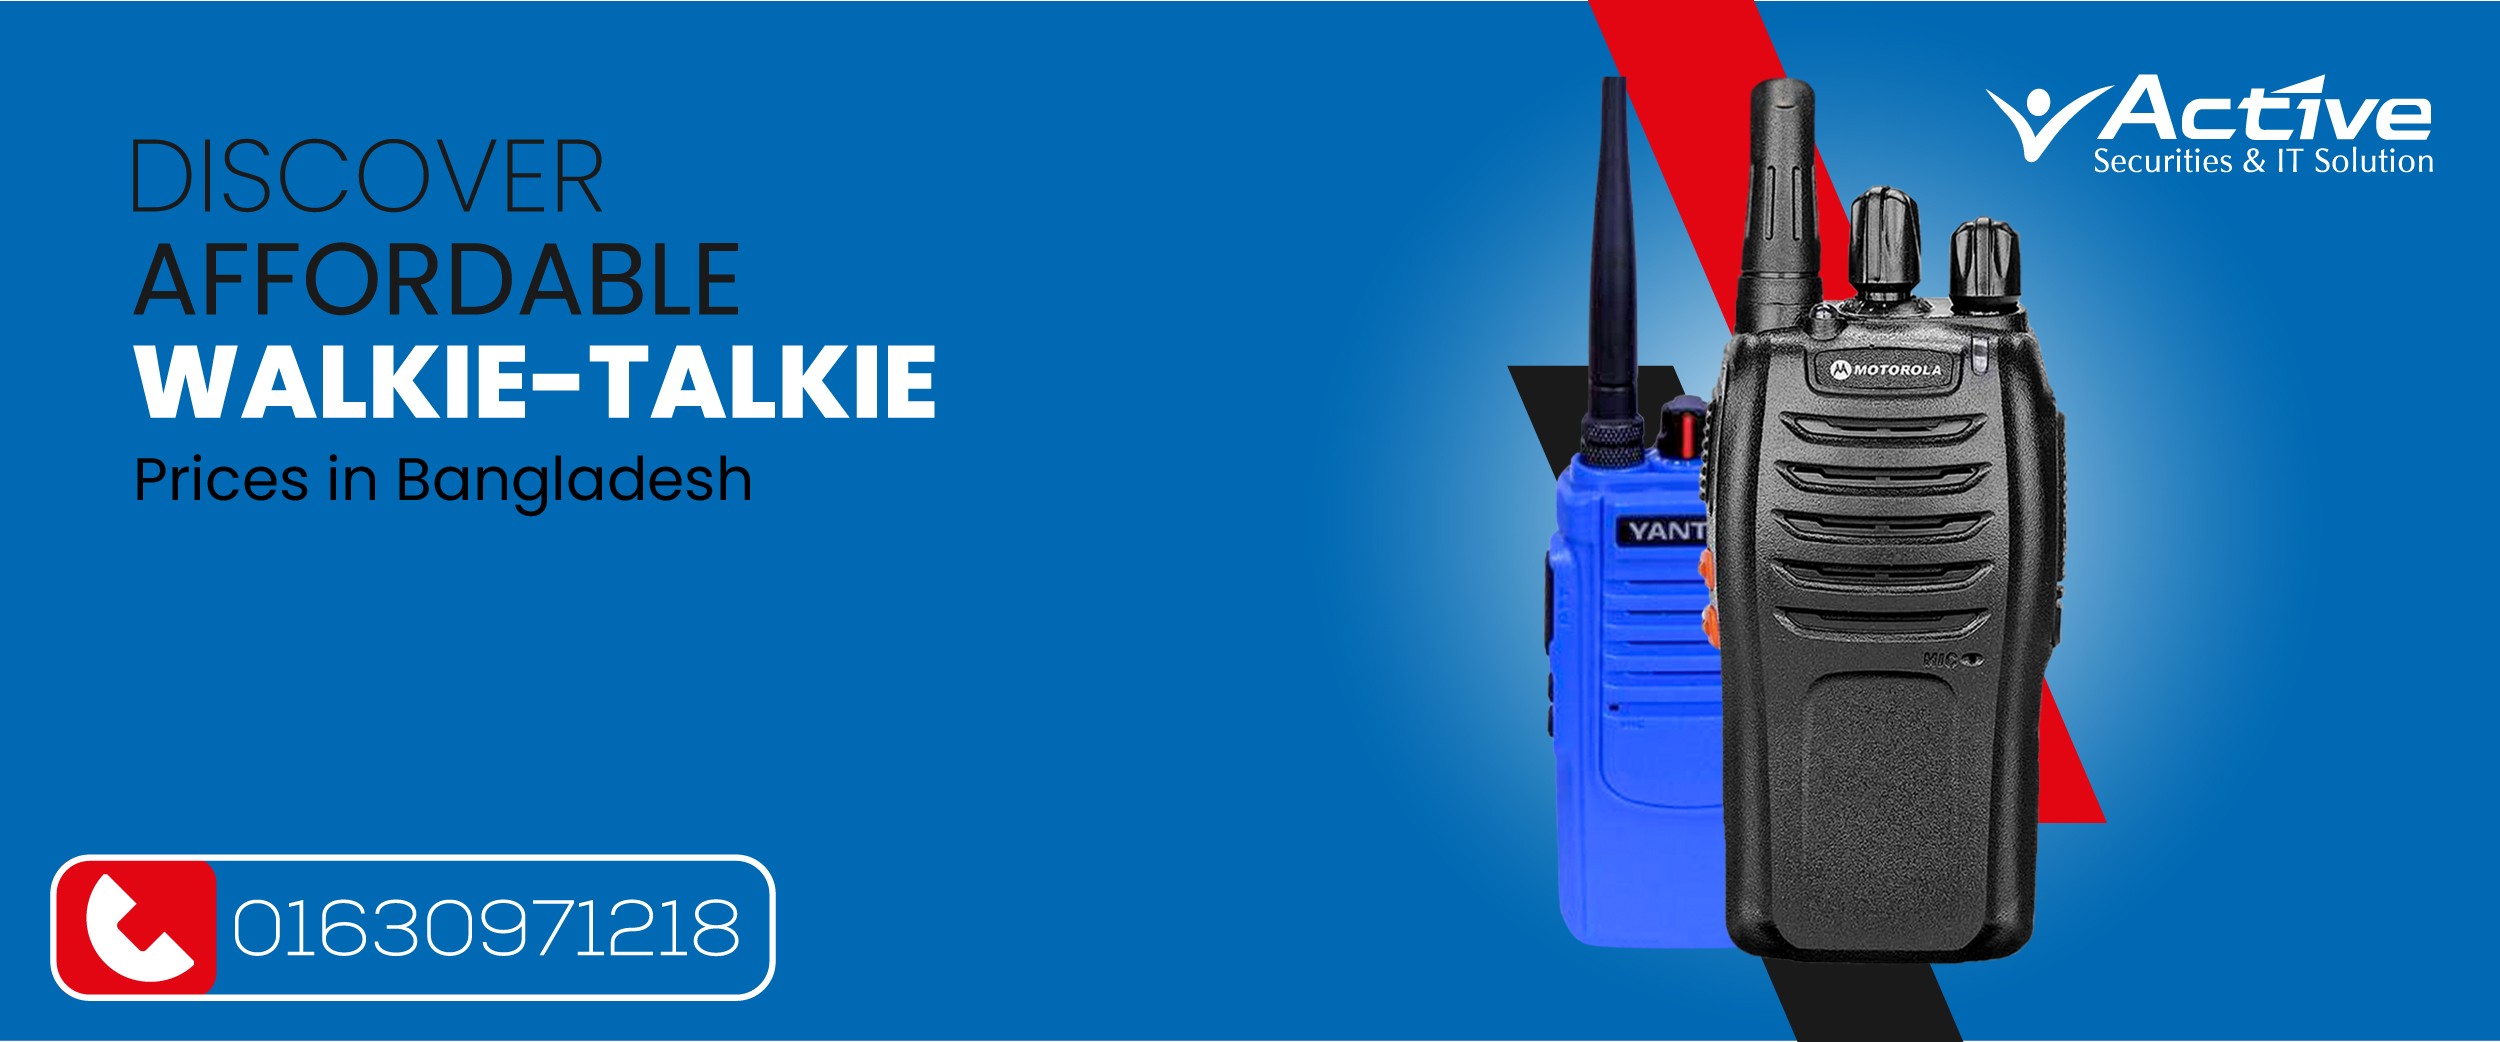 Discover Affordable Motorola Radio Prices in Bangladesh | Authorized Supplier